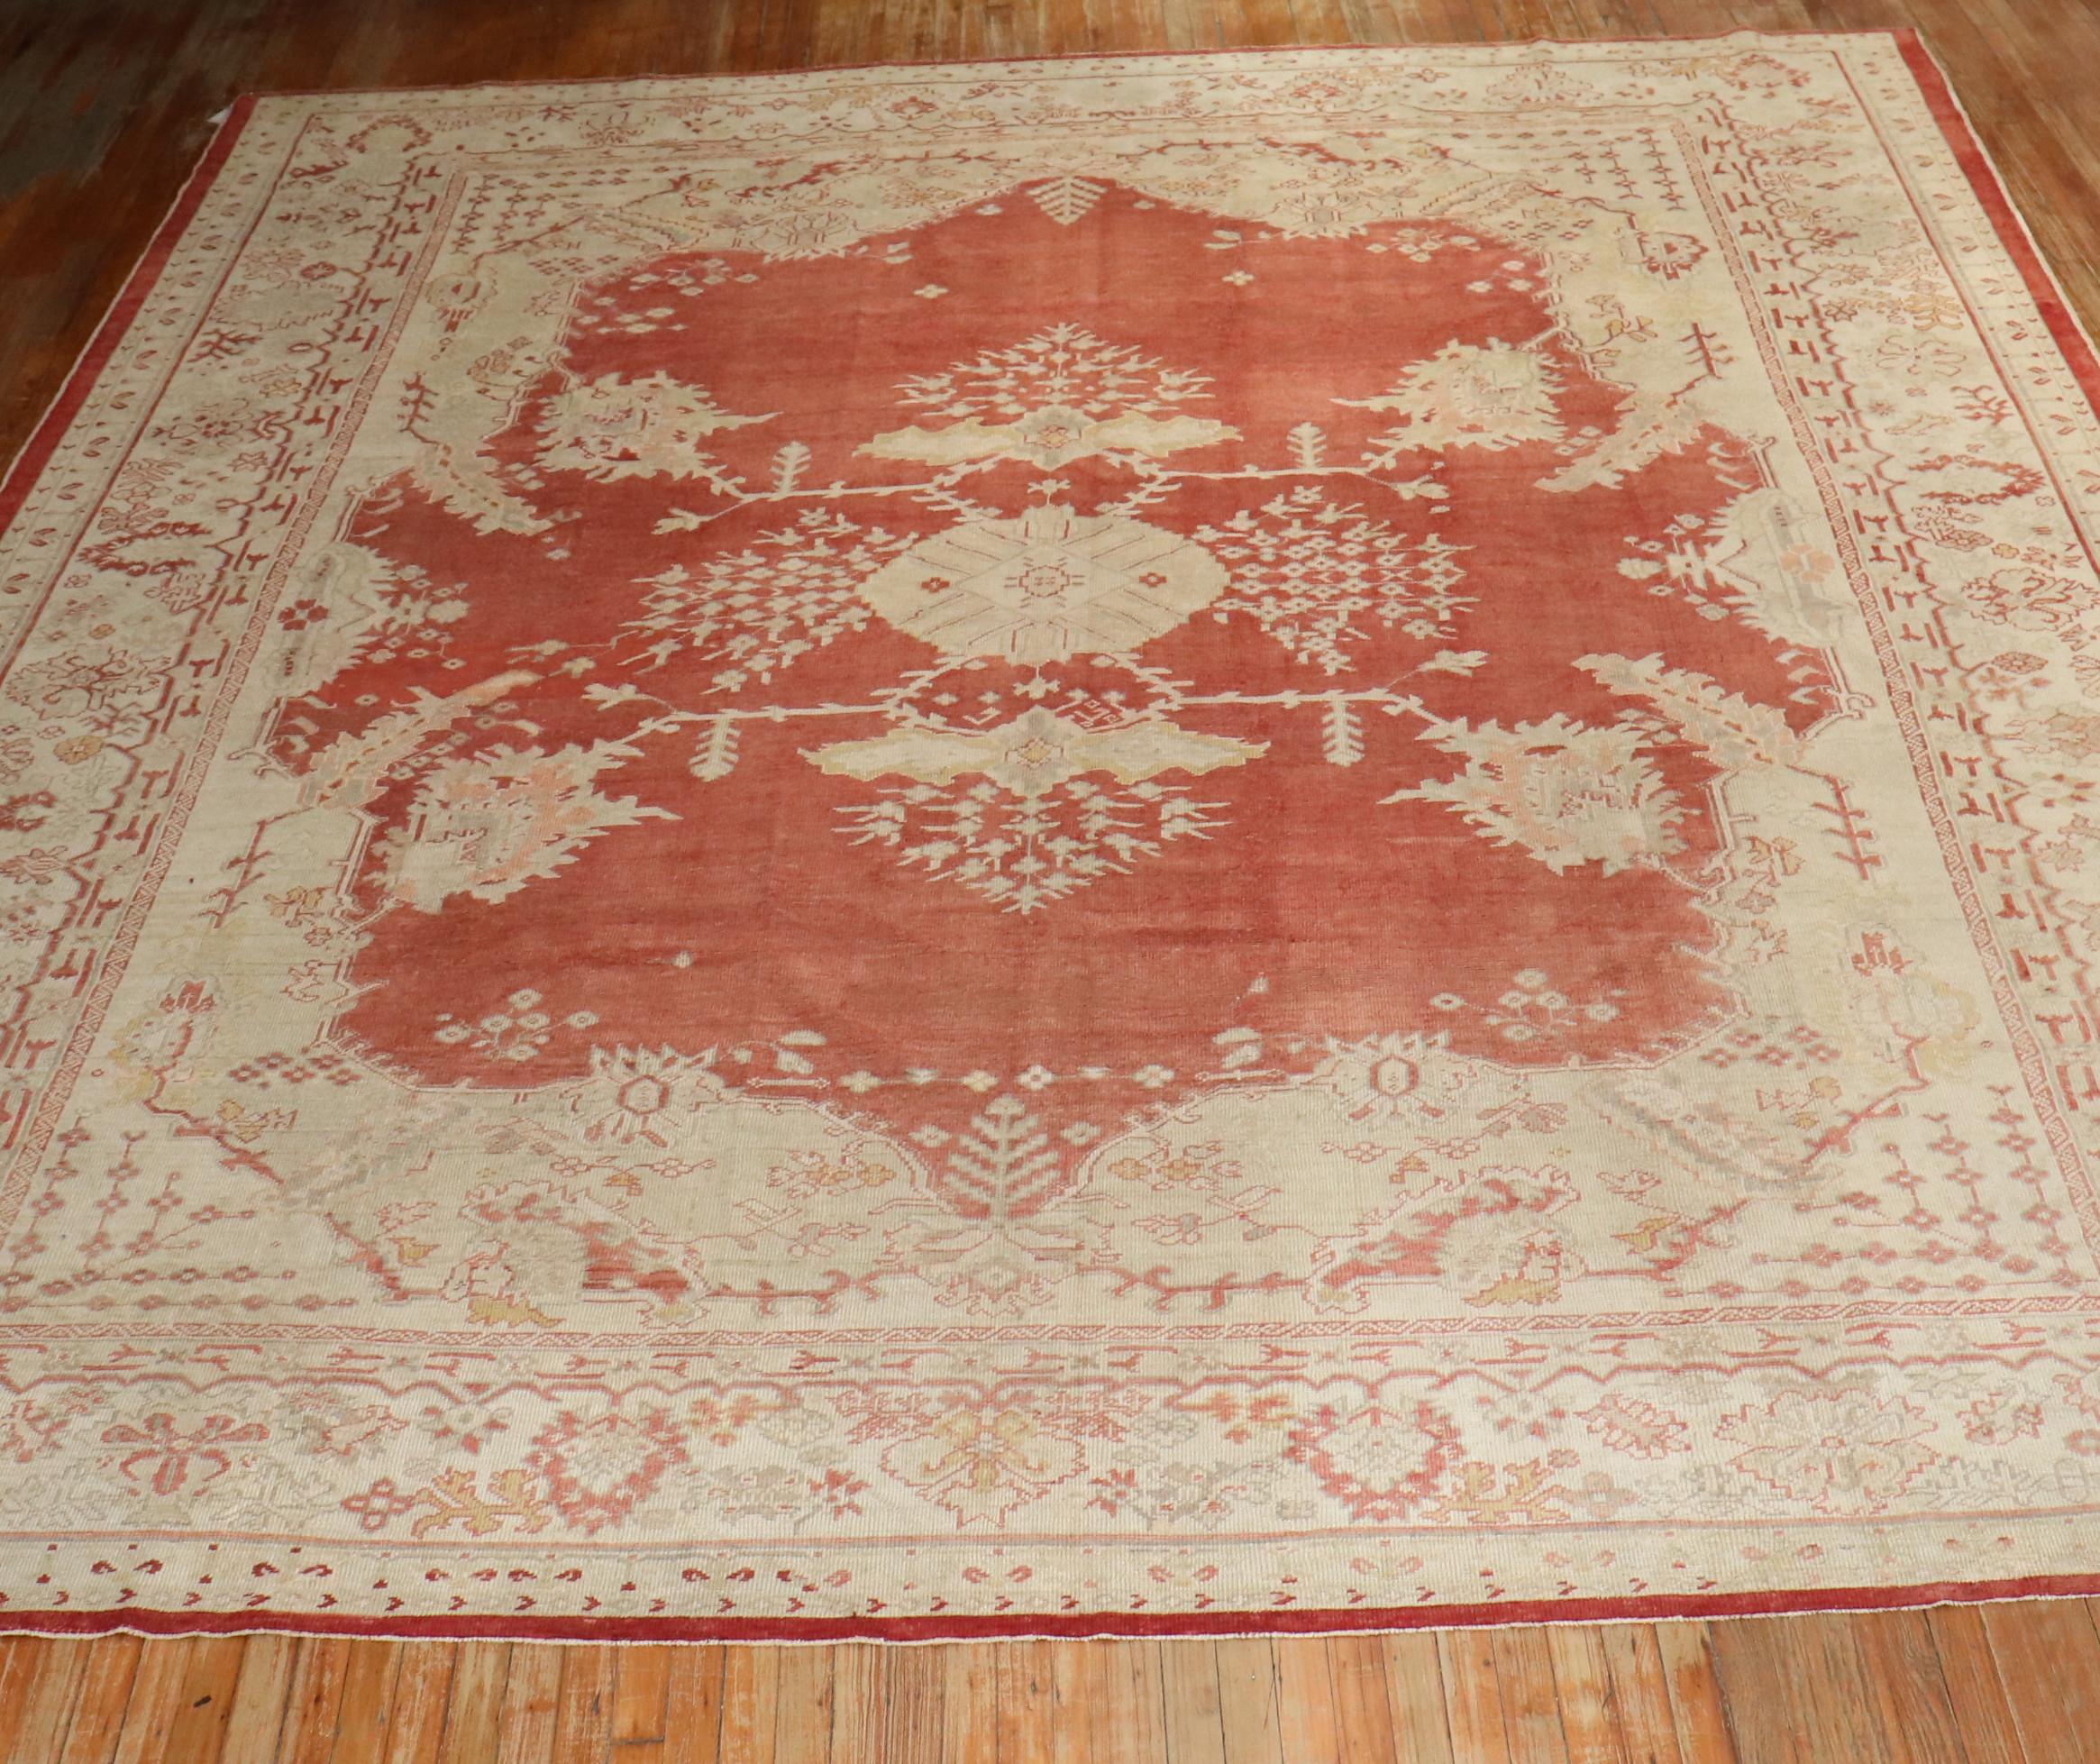 An early 20th-century antique Turkish Oushak rug

circa 1920, measures: 12'4” x 14'1”.